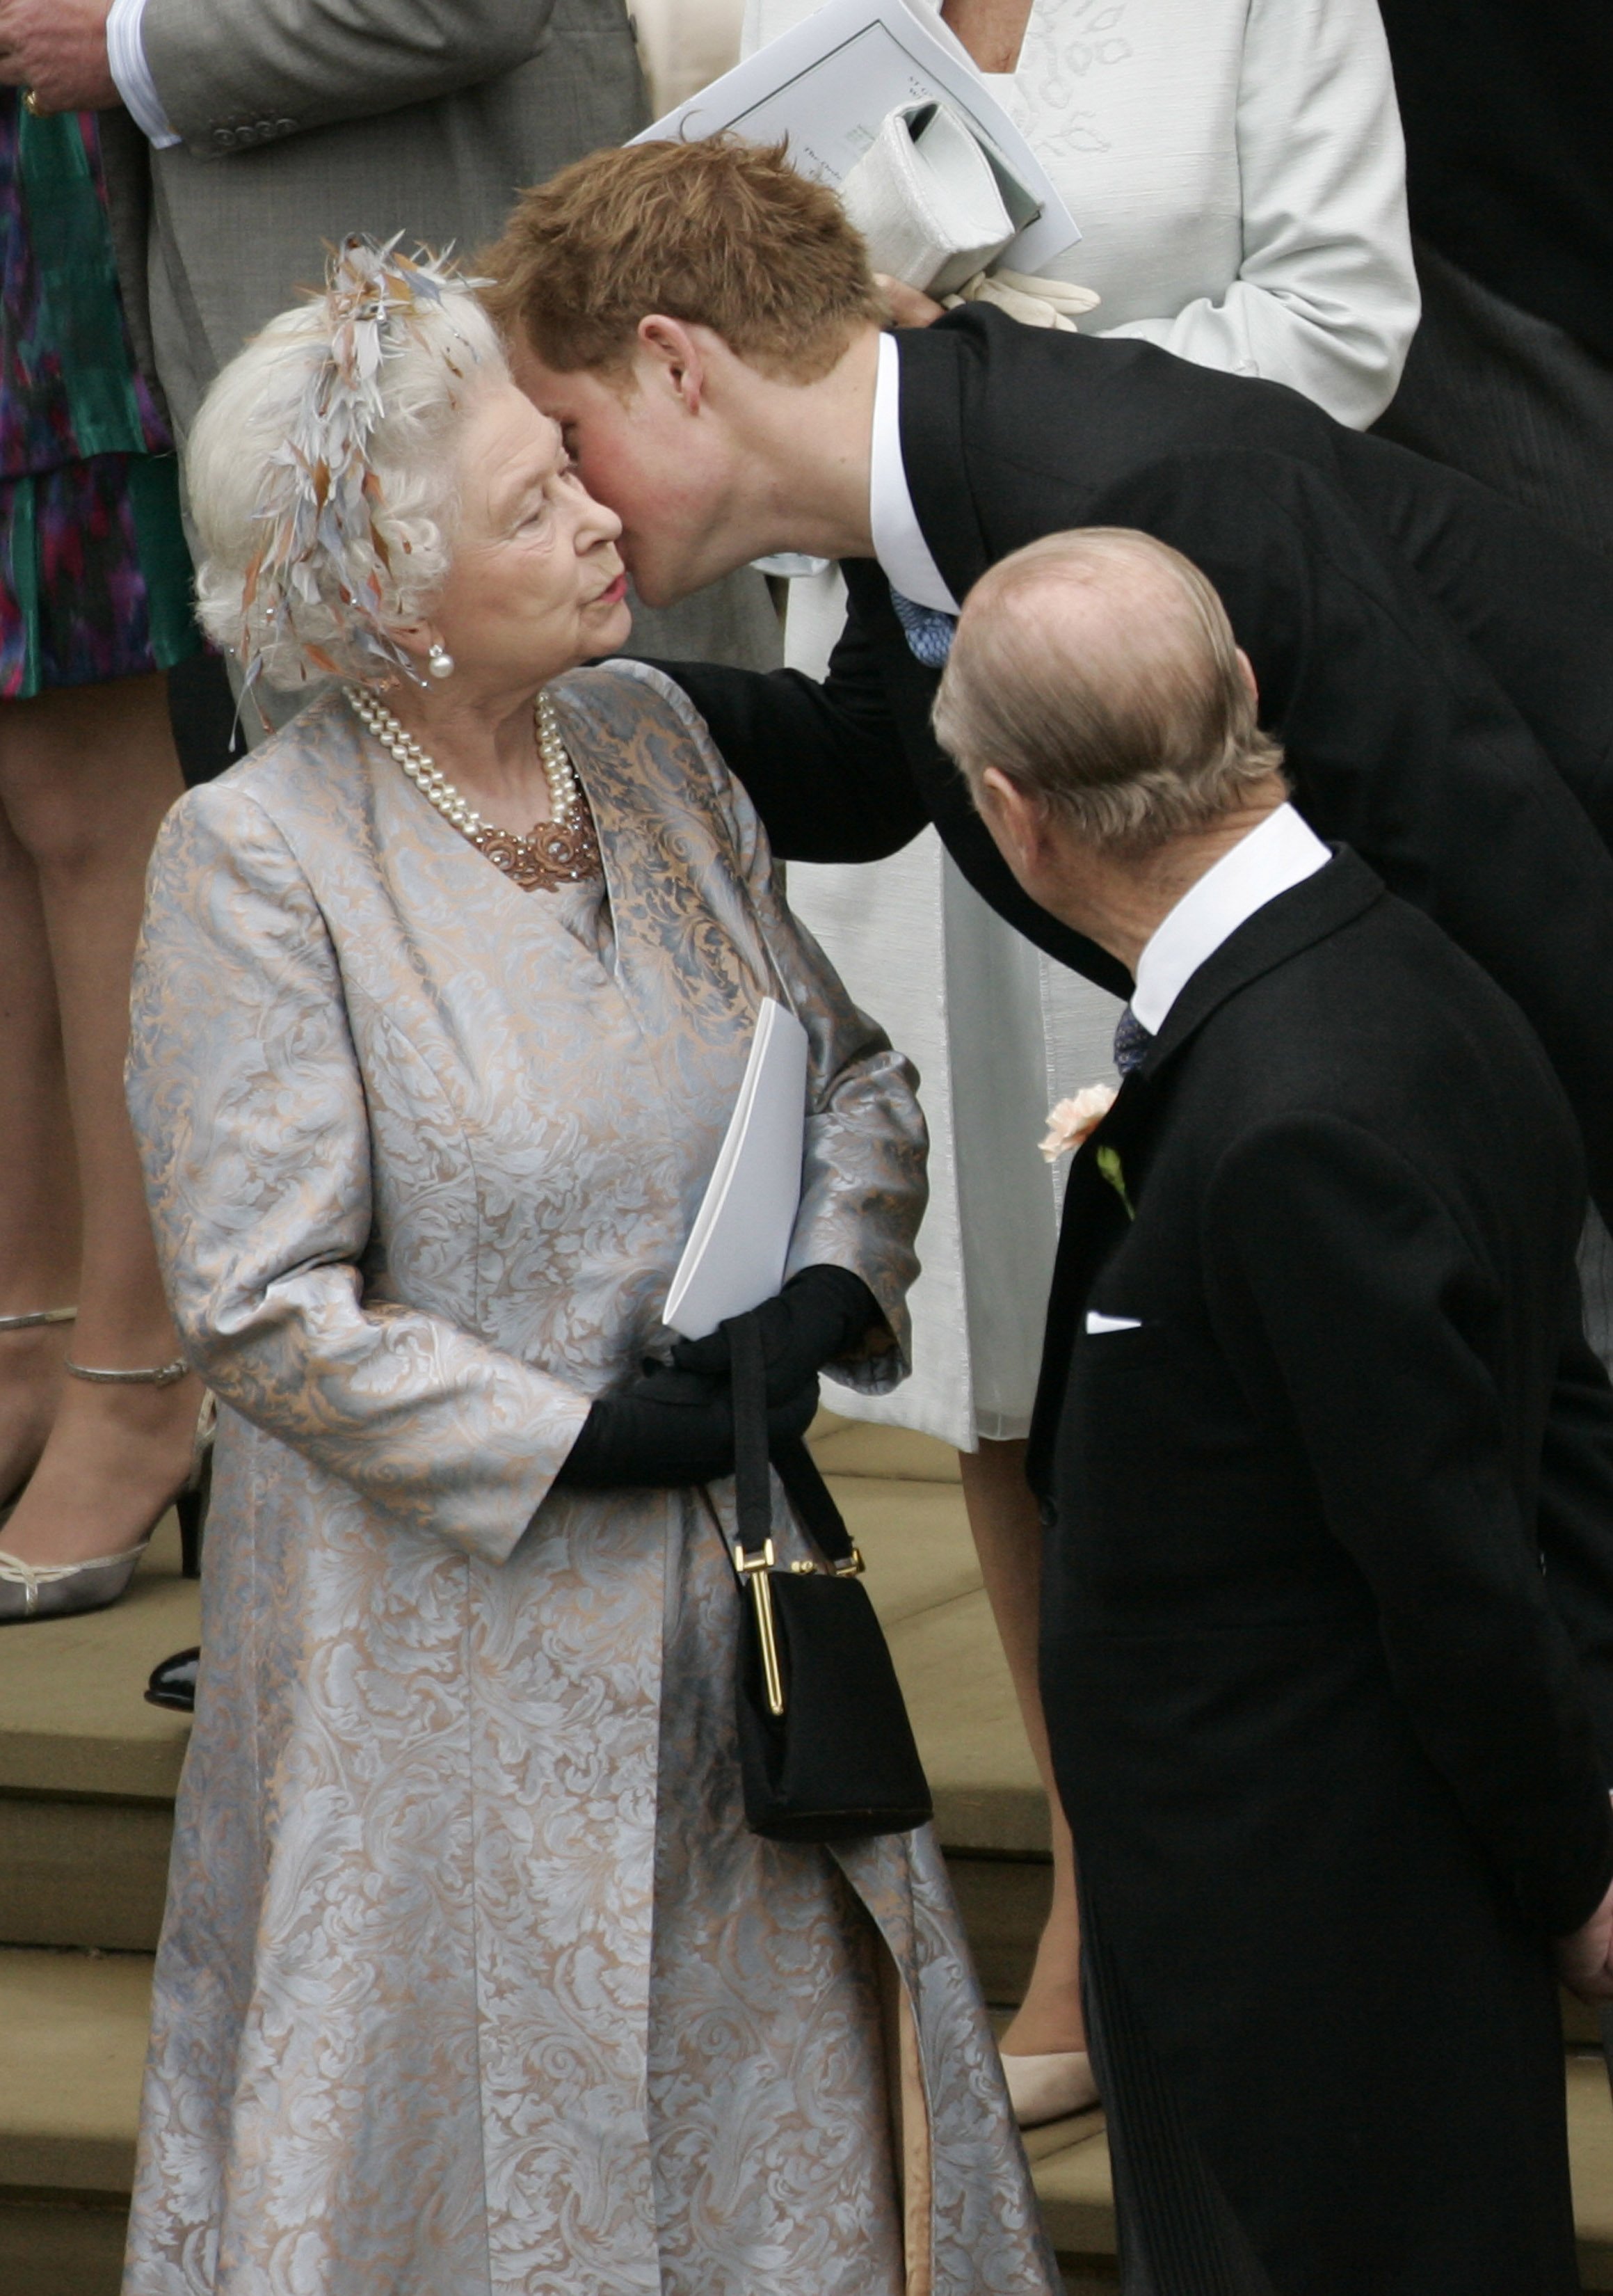 Prince Harry photographed kissing his grandmother Queen Elizabeth II after the wedding of Peter Phillips to Autumn Kelly, at St George's Chapel in Windsor Castle on May 17, 2008 in Windsor, England. │ Source: Getty Images